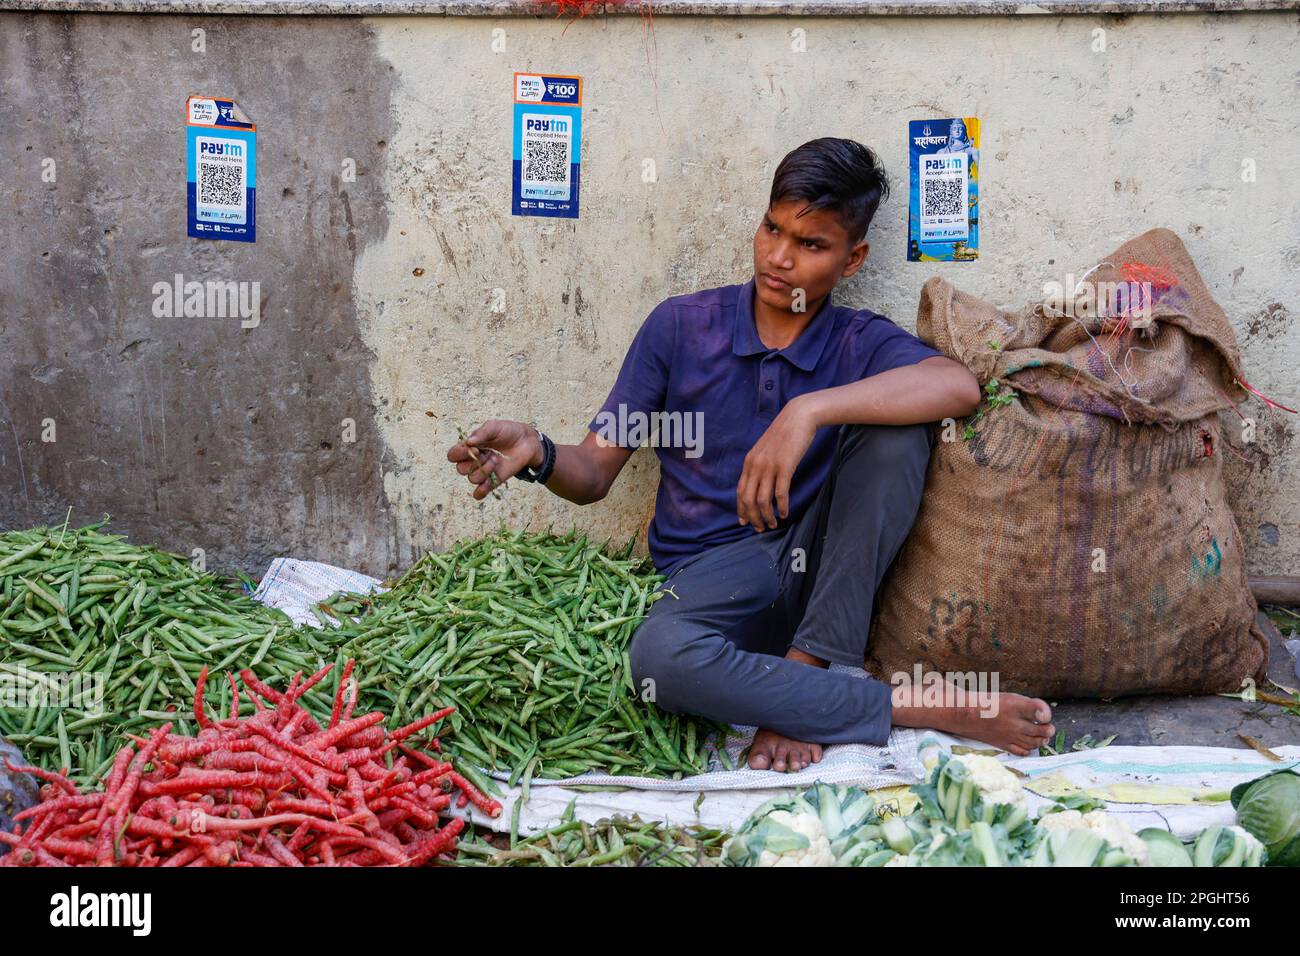 Vegetable street vendor with paytm cashless pay logo on the wall  in Paharganj,New Delhi,India Stock Photo